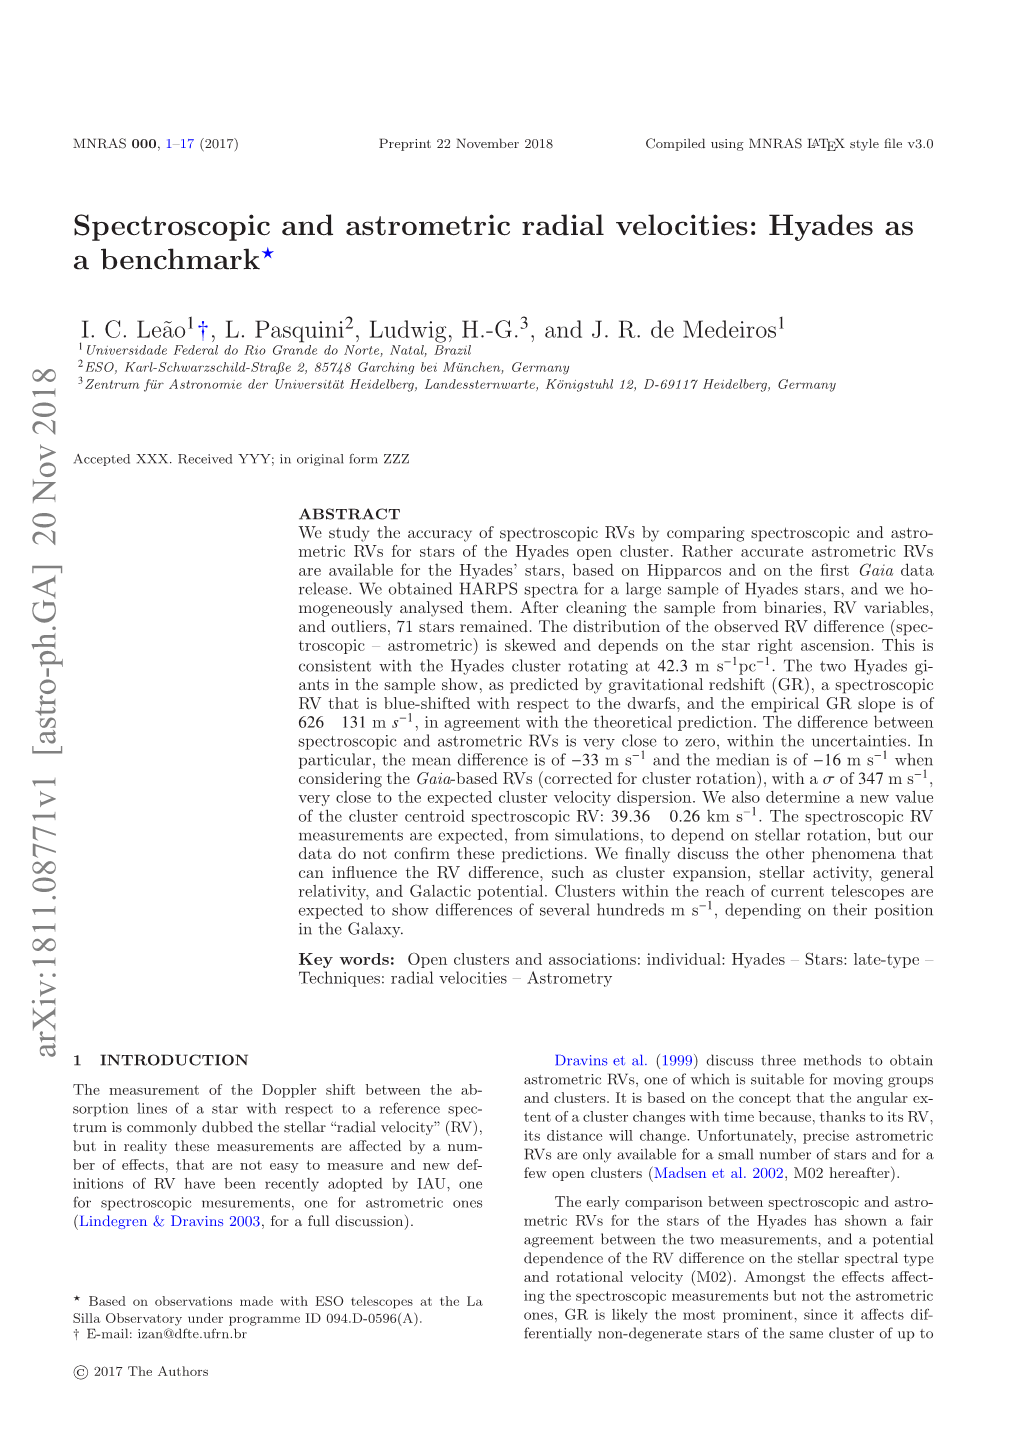 Spectroscopic and Astrometric Radial Velocities: Hyades As a Benchmark